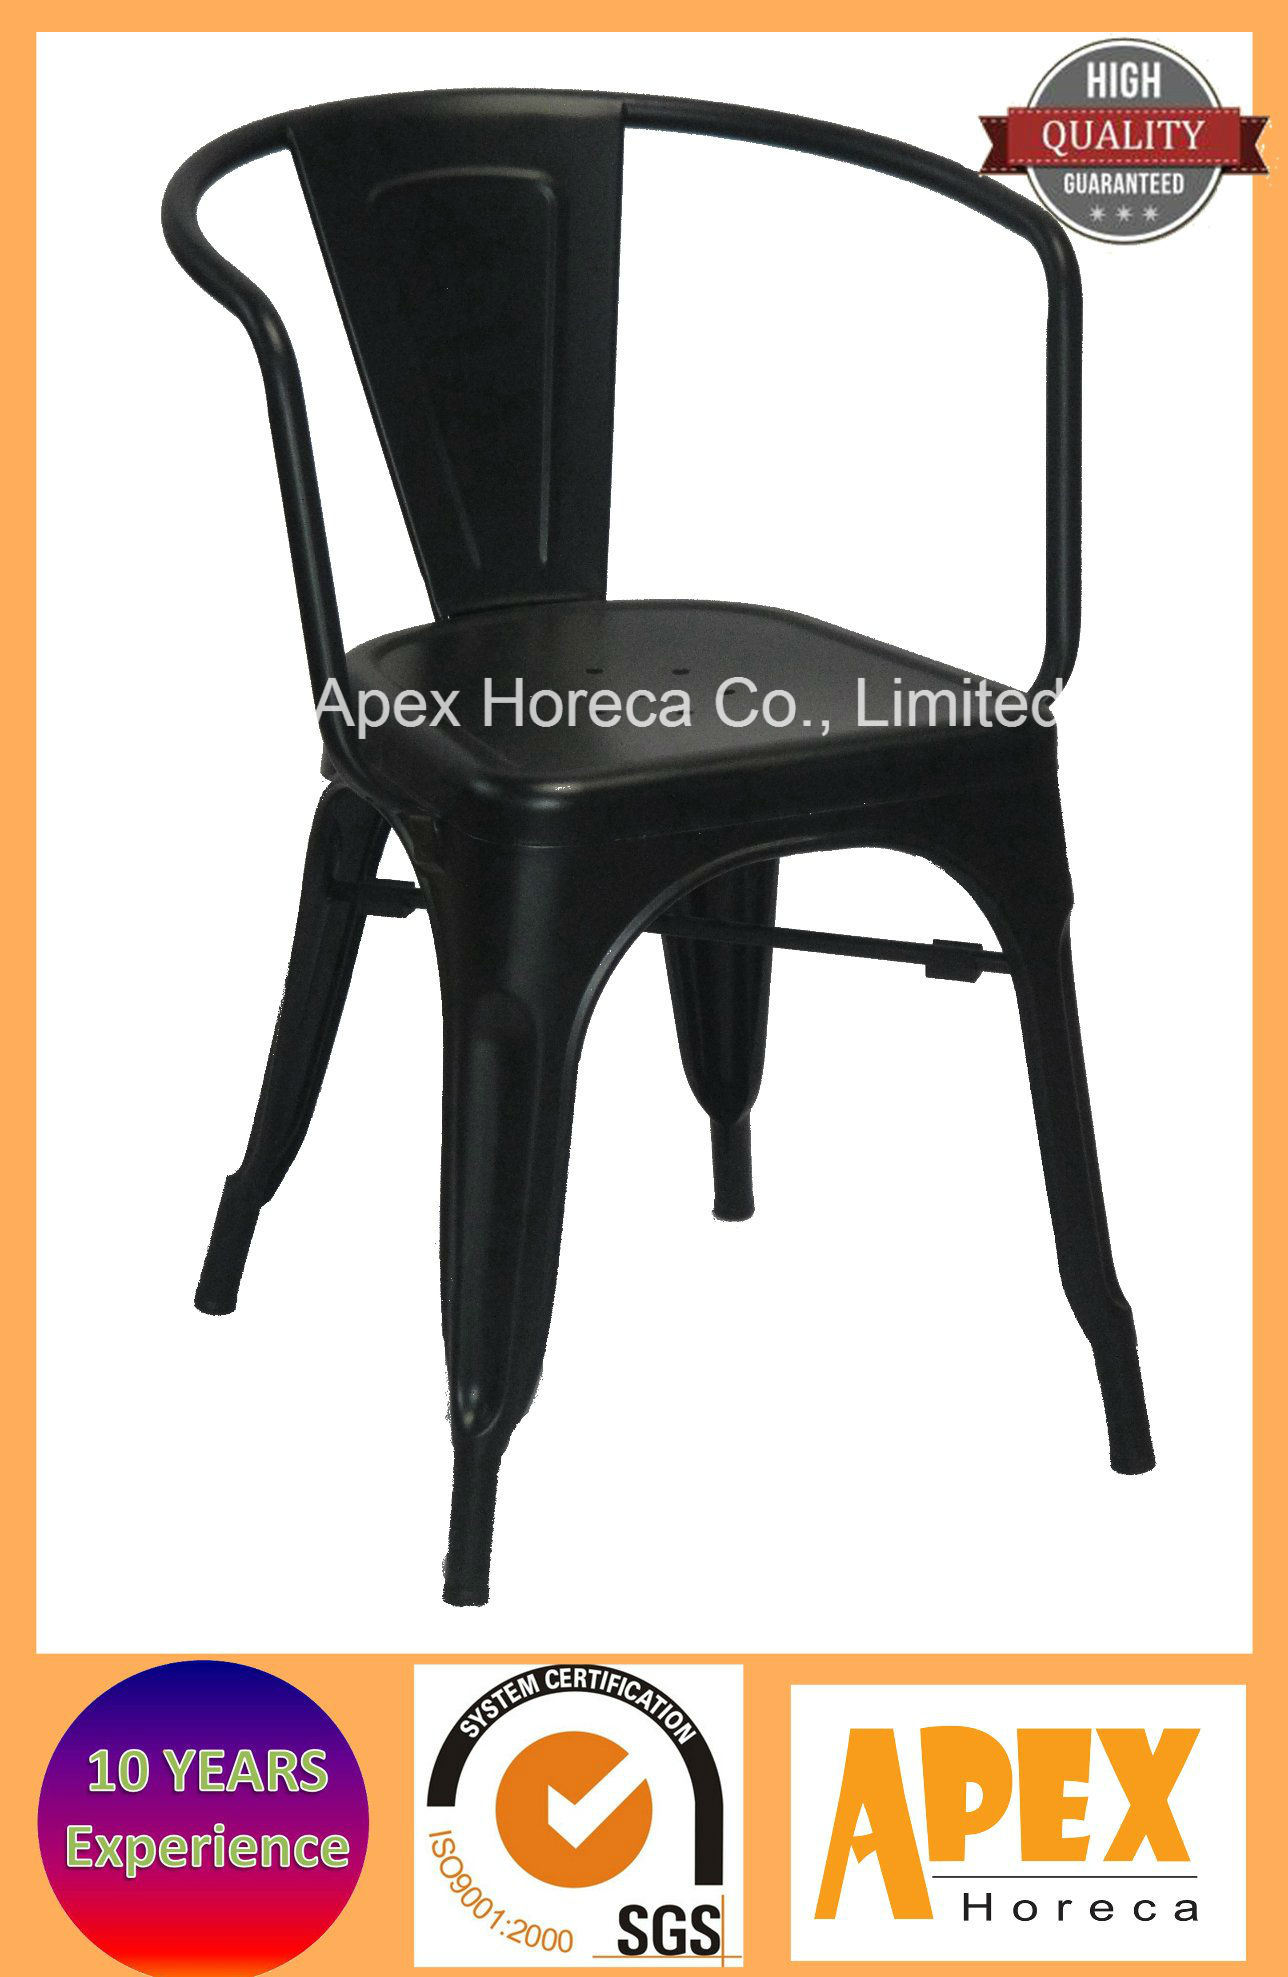 Tolix Arm Chair Steel Industrial Chair Restaurant Furniture Cafe Dining Chair